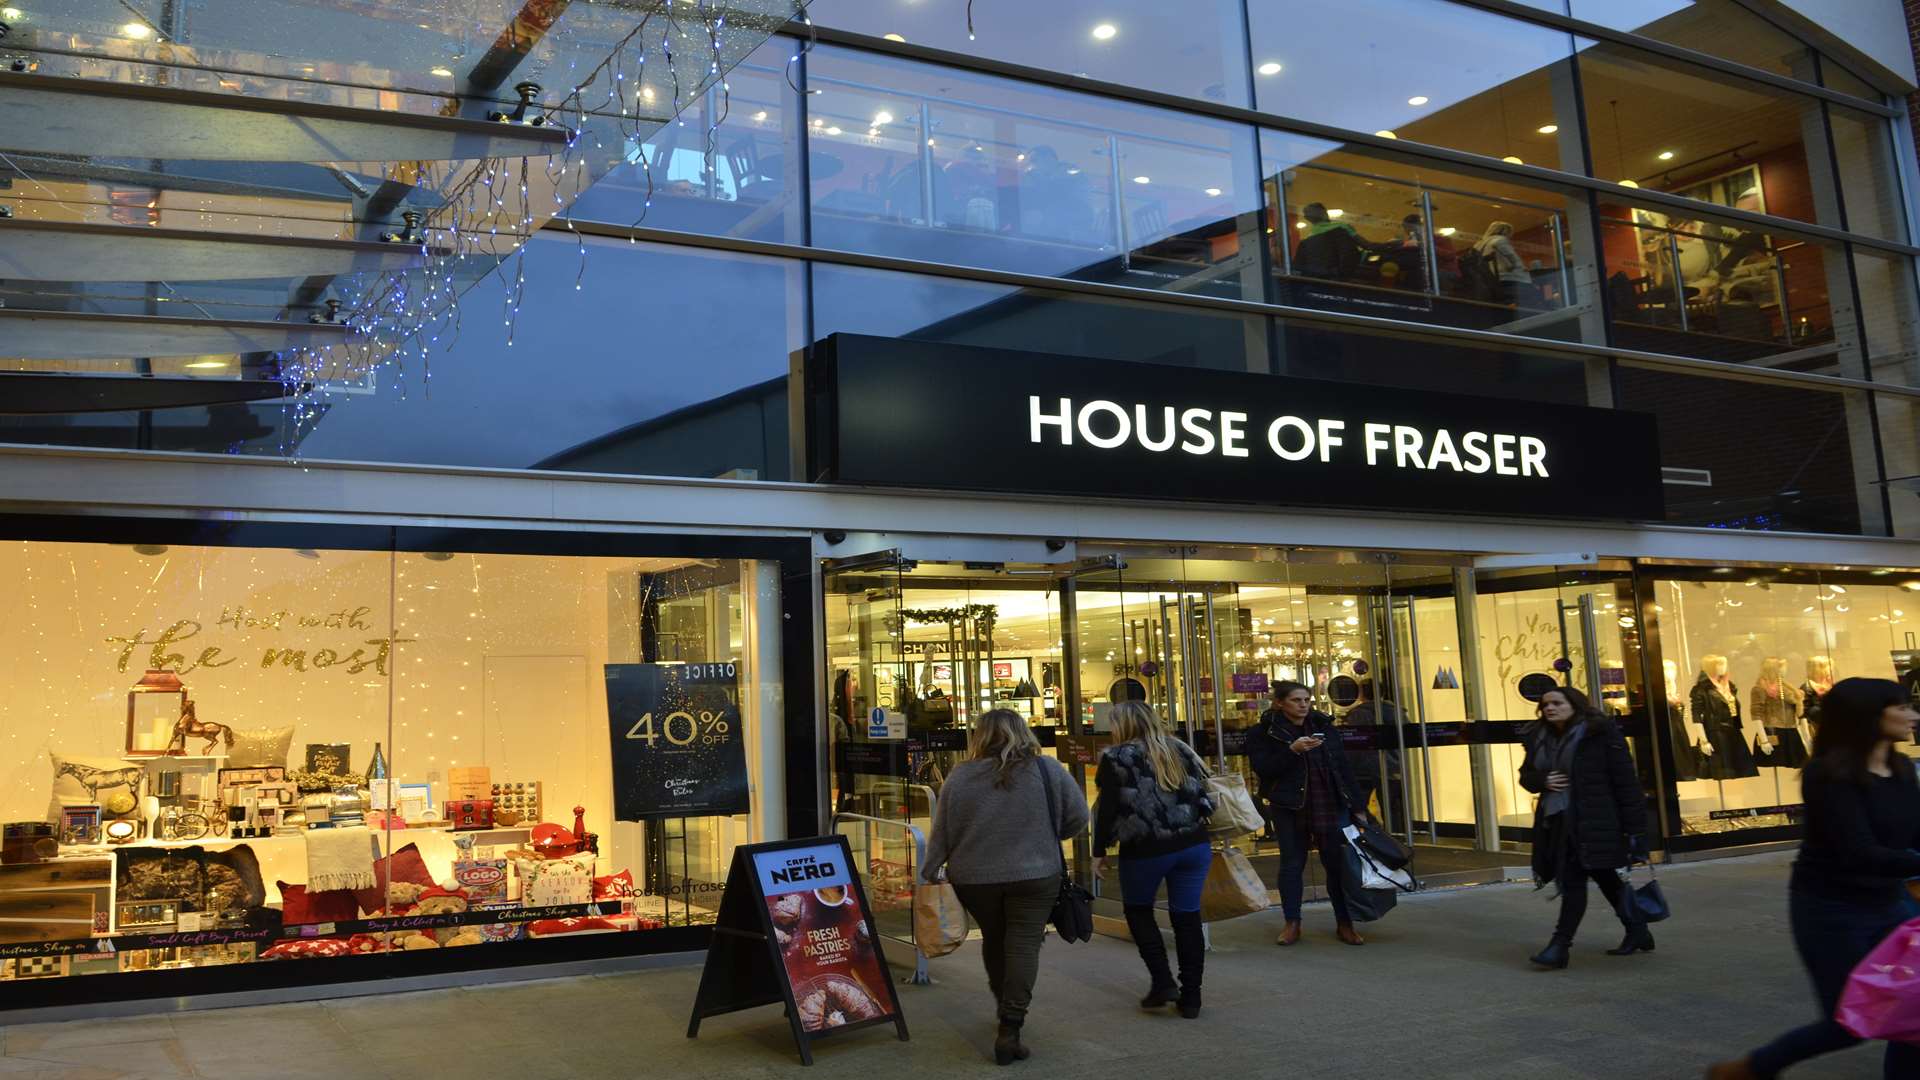 The House of Fraser store in Fremlin Walk, where the 22-year-old tried to tried to obtain perfume using forged gift vouchers